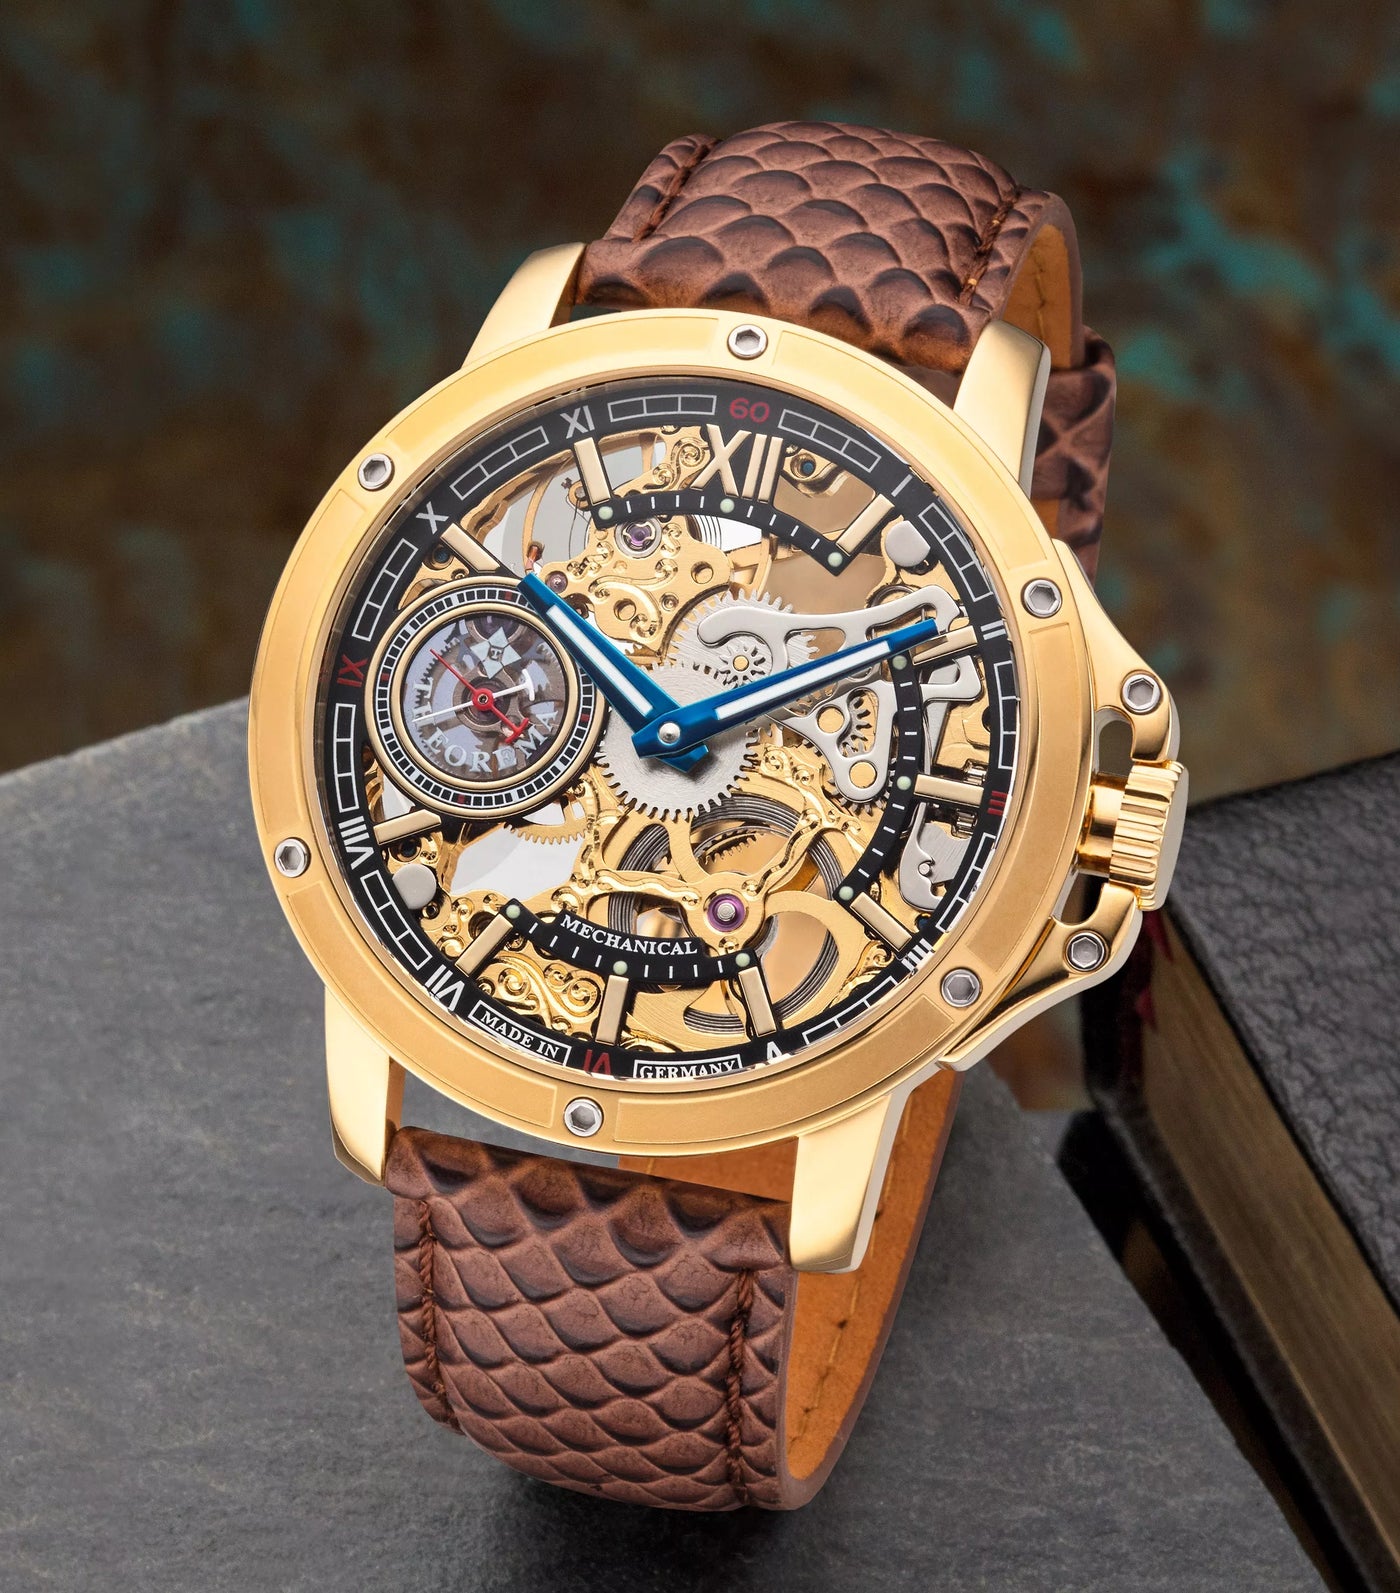 Your purest acquired taste for this mechanical watch will make it enjoyable every time.